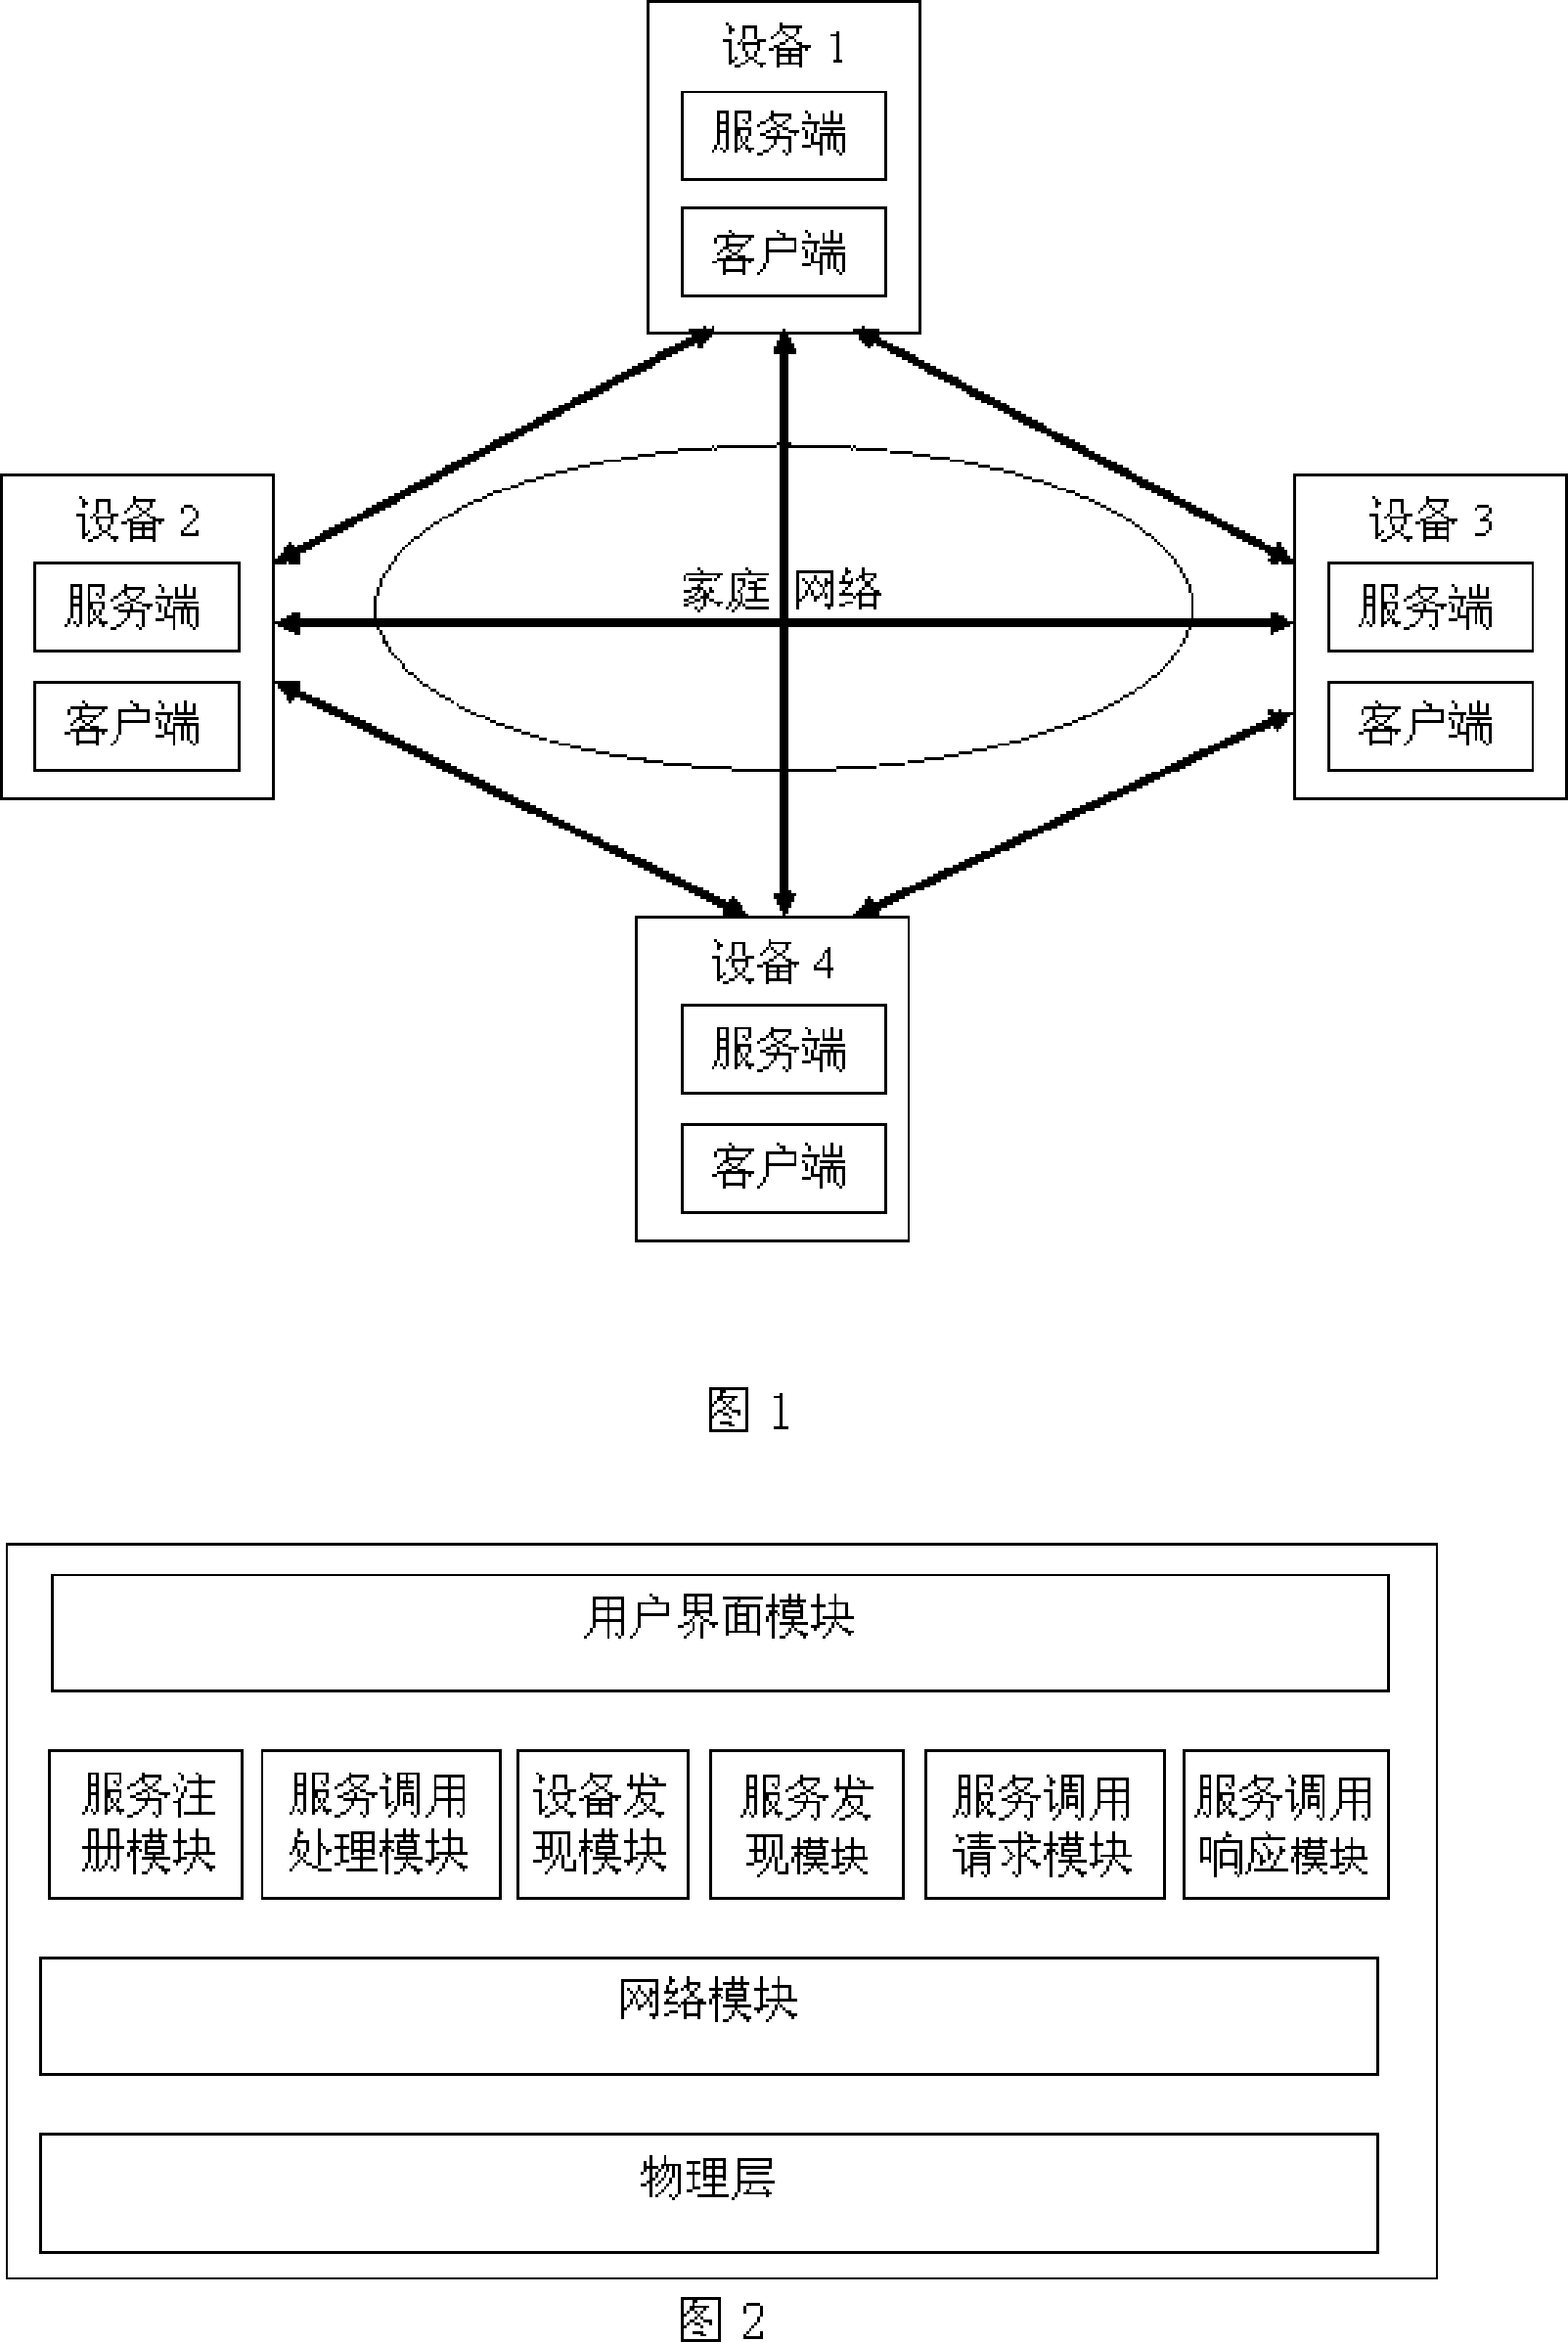 Service collaboration method between devices in home network